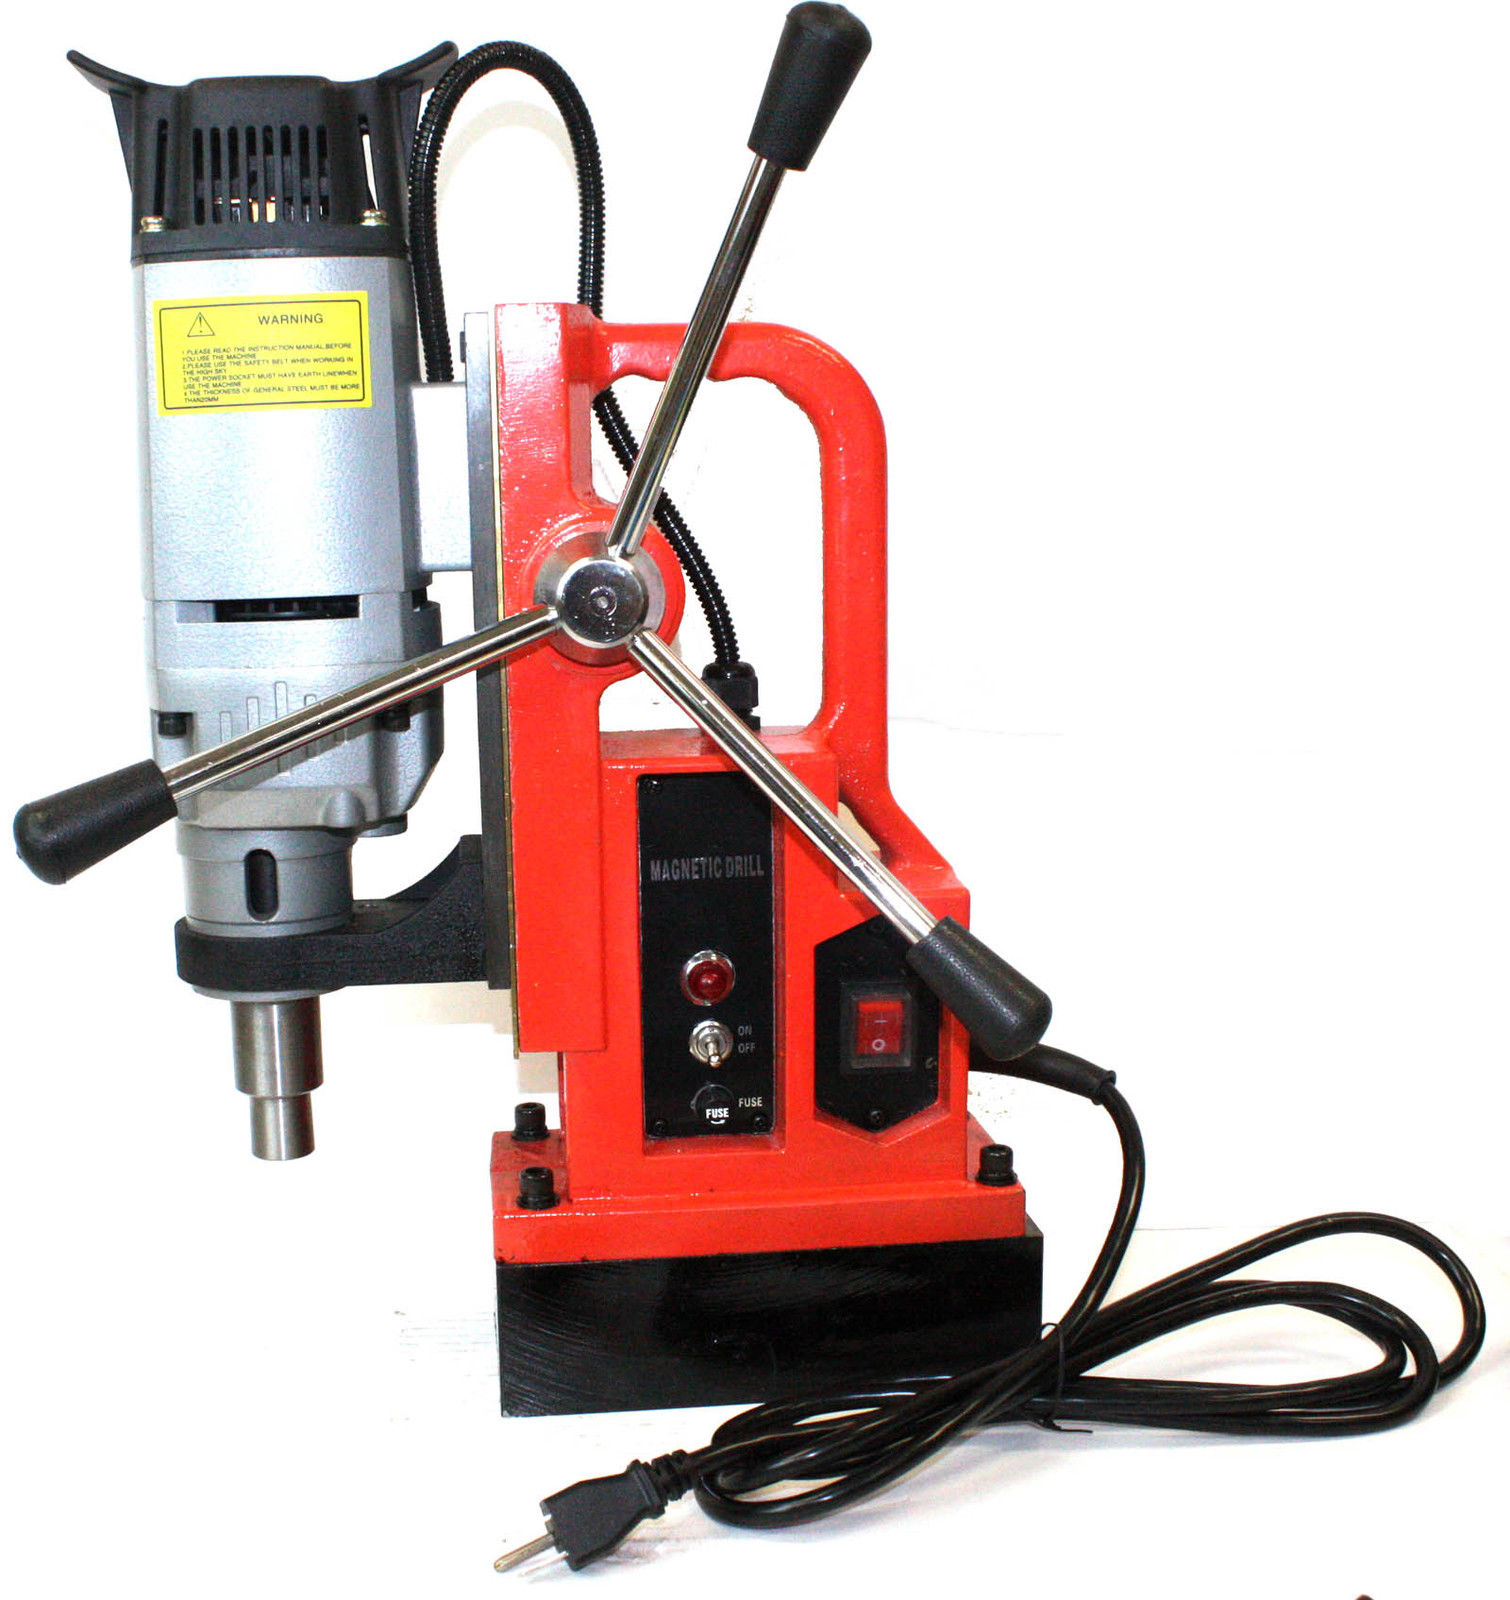 1350W Magnetic Drill Press 1" Boring & 3372 LBS Magnet Force 